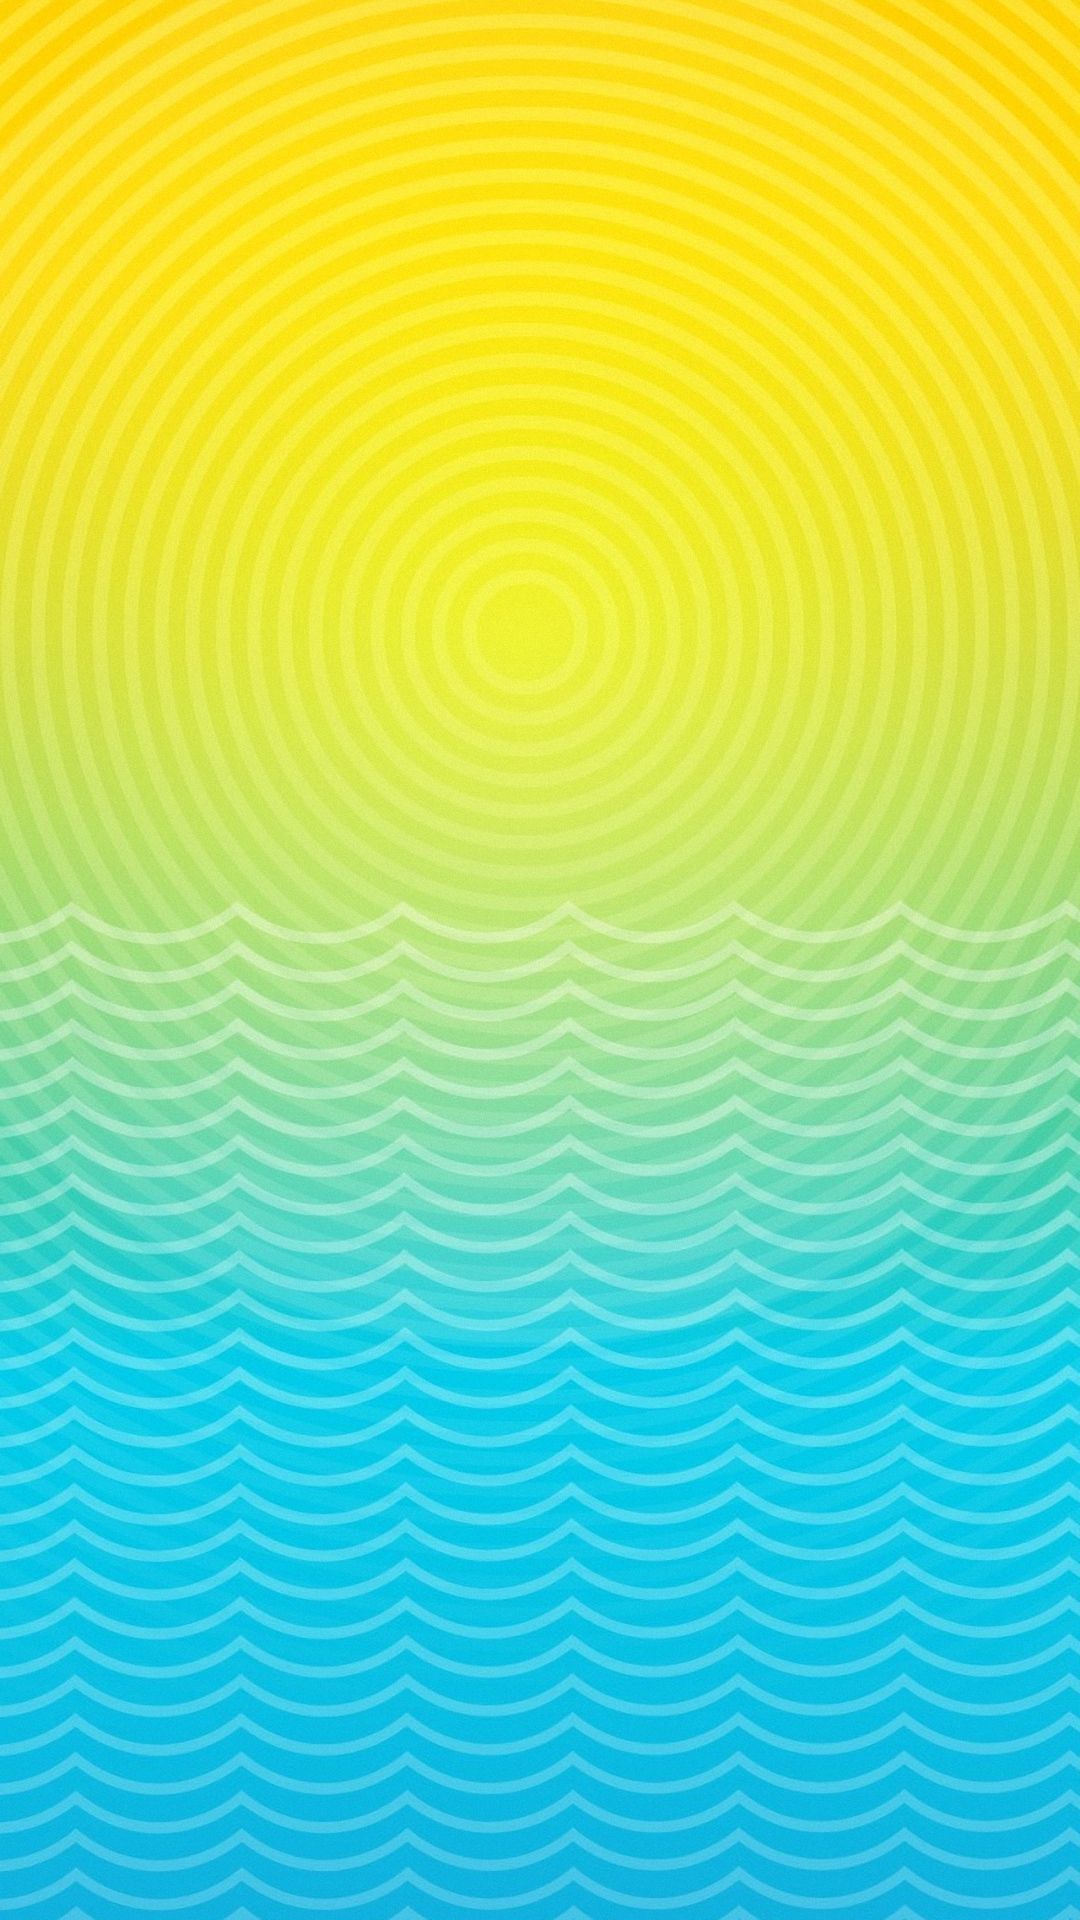 Wallpapers Hd - Yellow And Blue Iphone , HD Wallpaper & Backgrounds